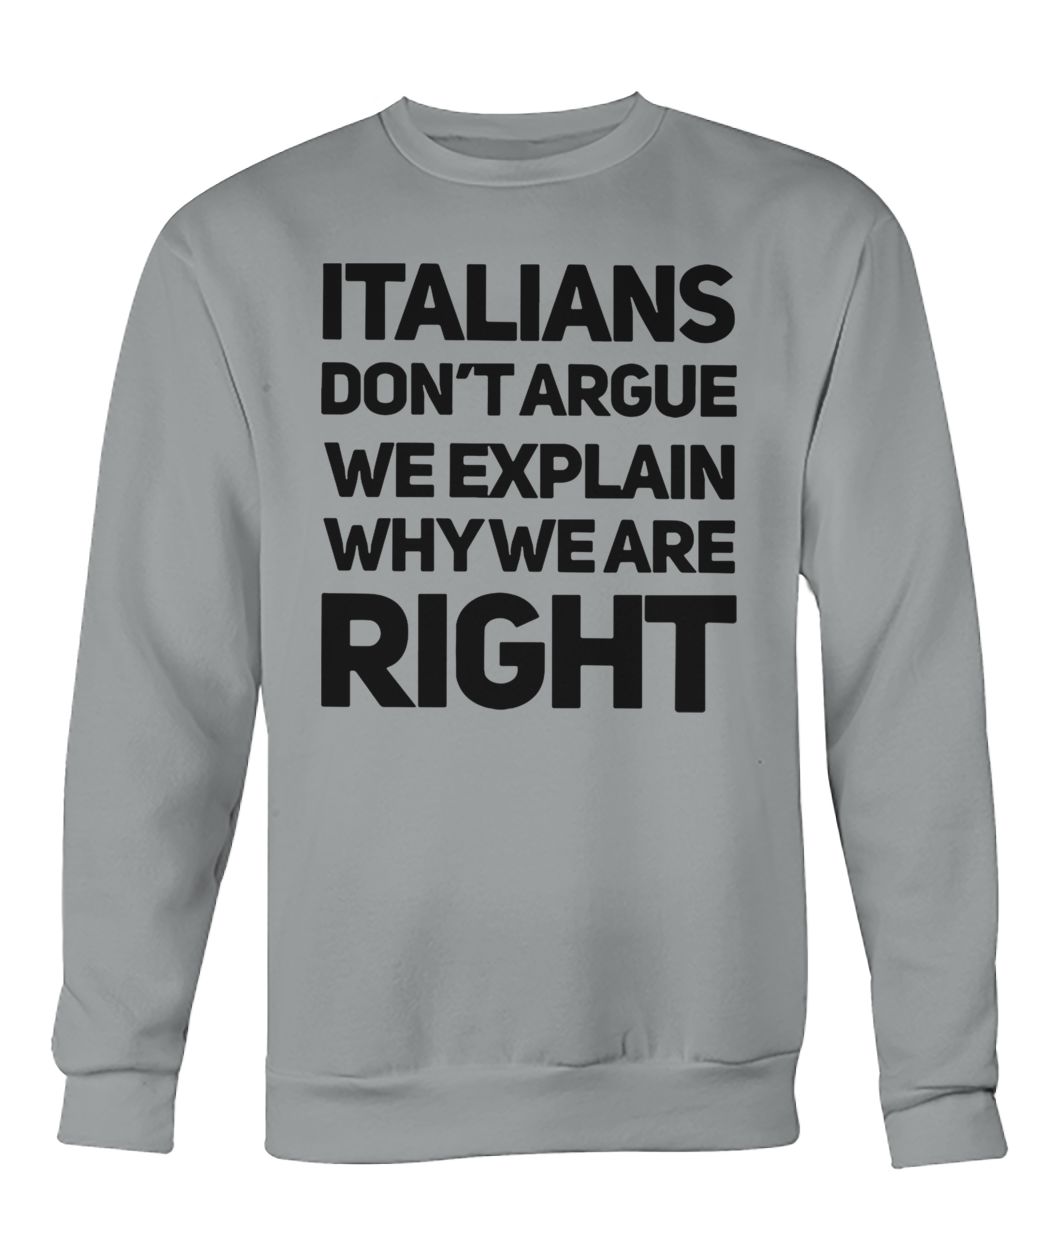 Italians don’t argue we explain why we are right sweatshirt